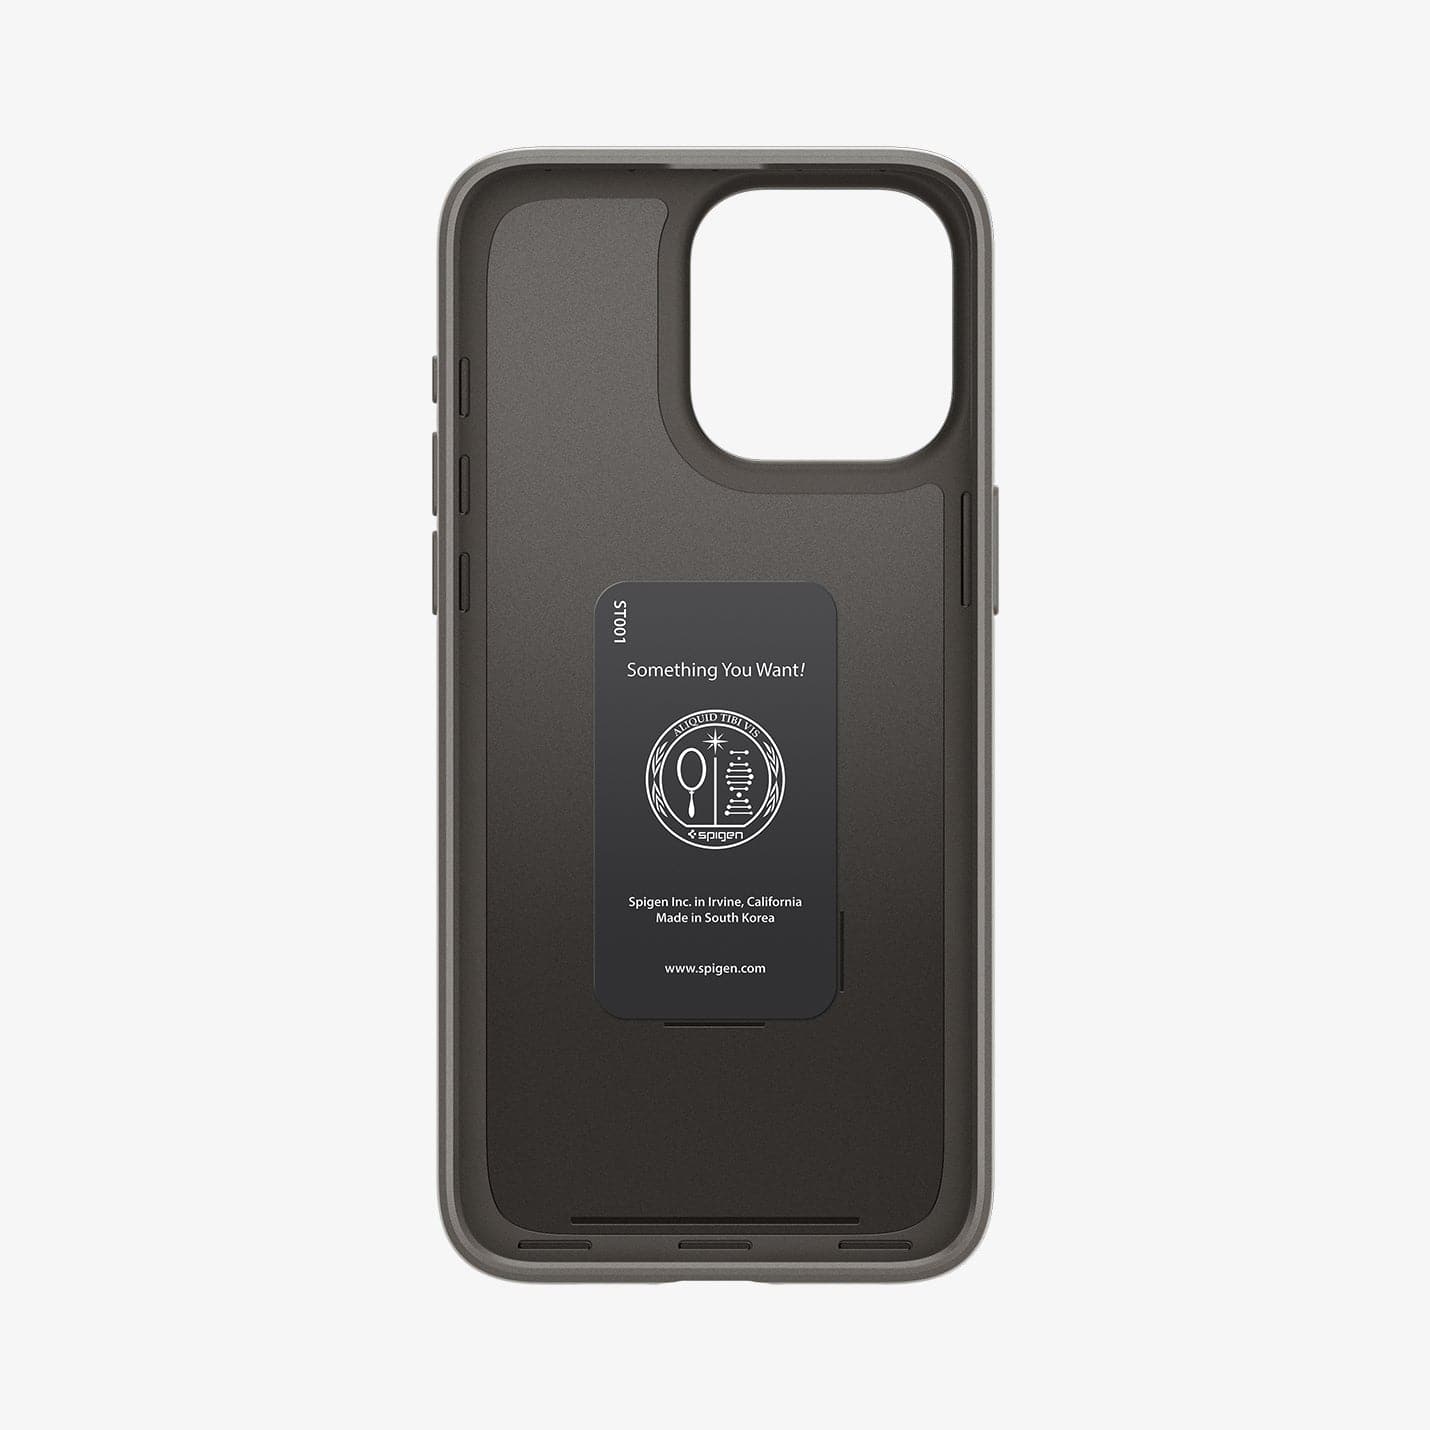 ACS06545 - iPhone 15 Pro Max Case Thin Fit in gunmetal showing the inside of case